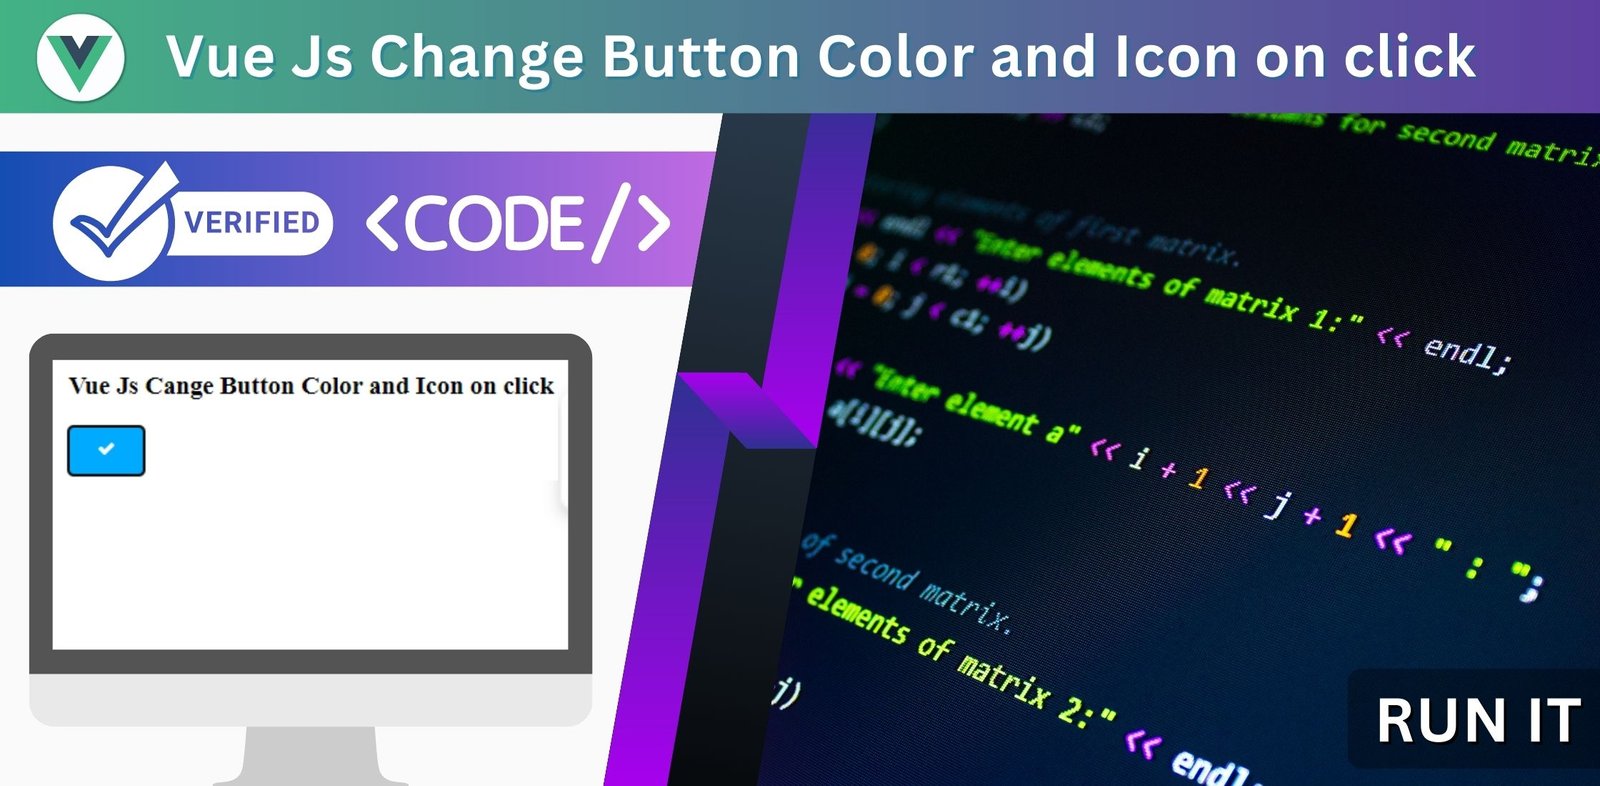 Vue Js Change Button Color and Icon on click